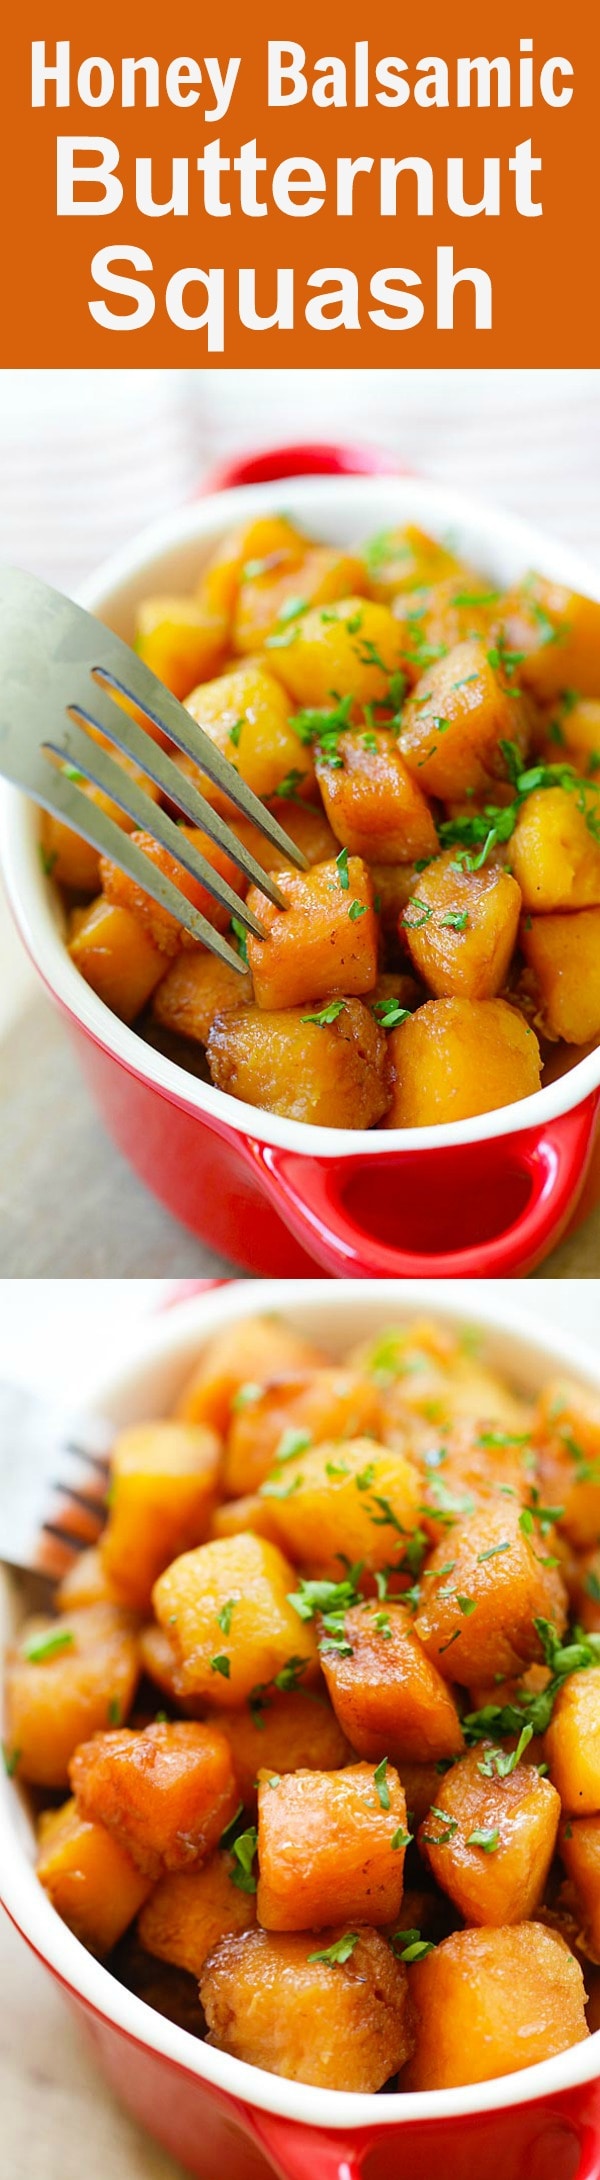 Honey Balsamic Butternut Squash - roasted butternut squash with honey balsamic. A perfect side dish recipe that takes only 20 mins. | rasamalaysia.com